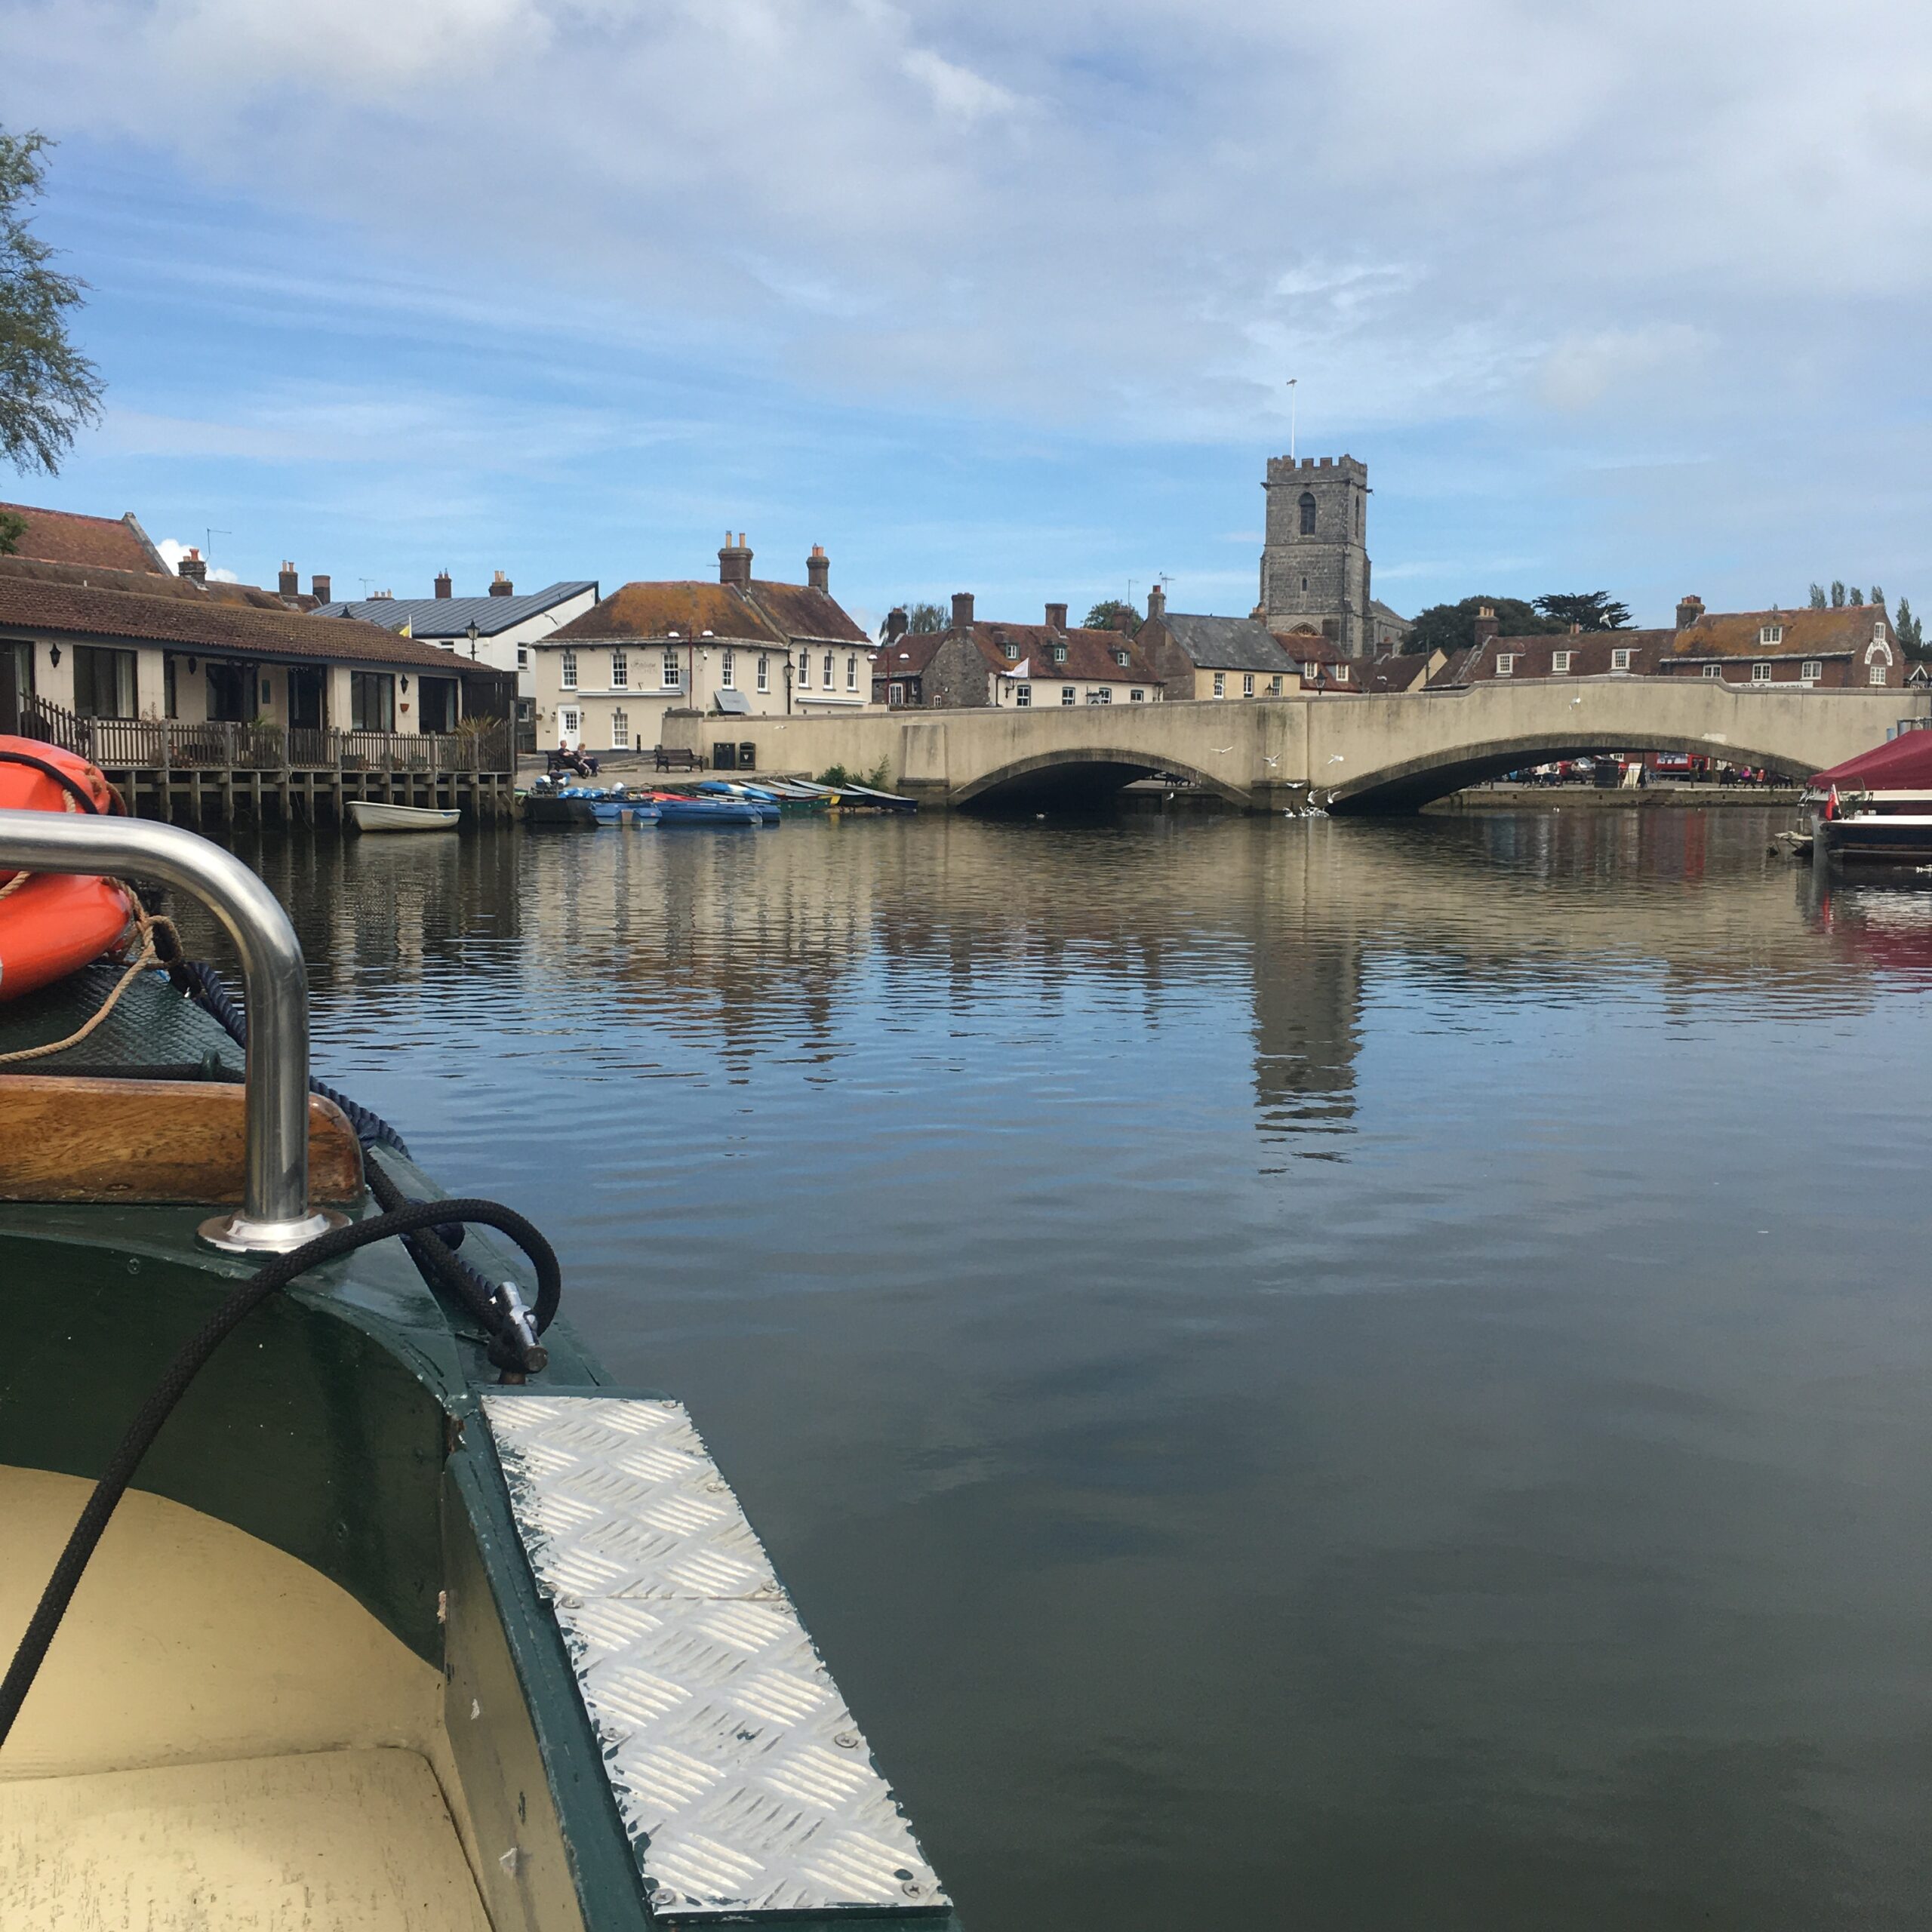 A boat trip to see Wareham Castle within the Saxon Walls of Wareham